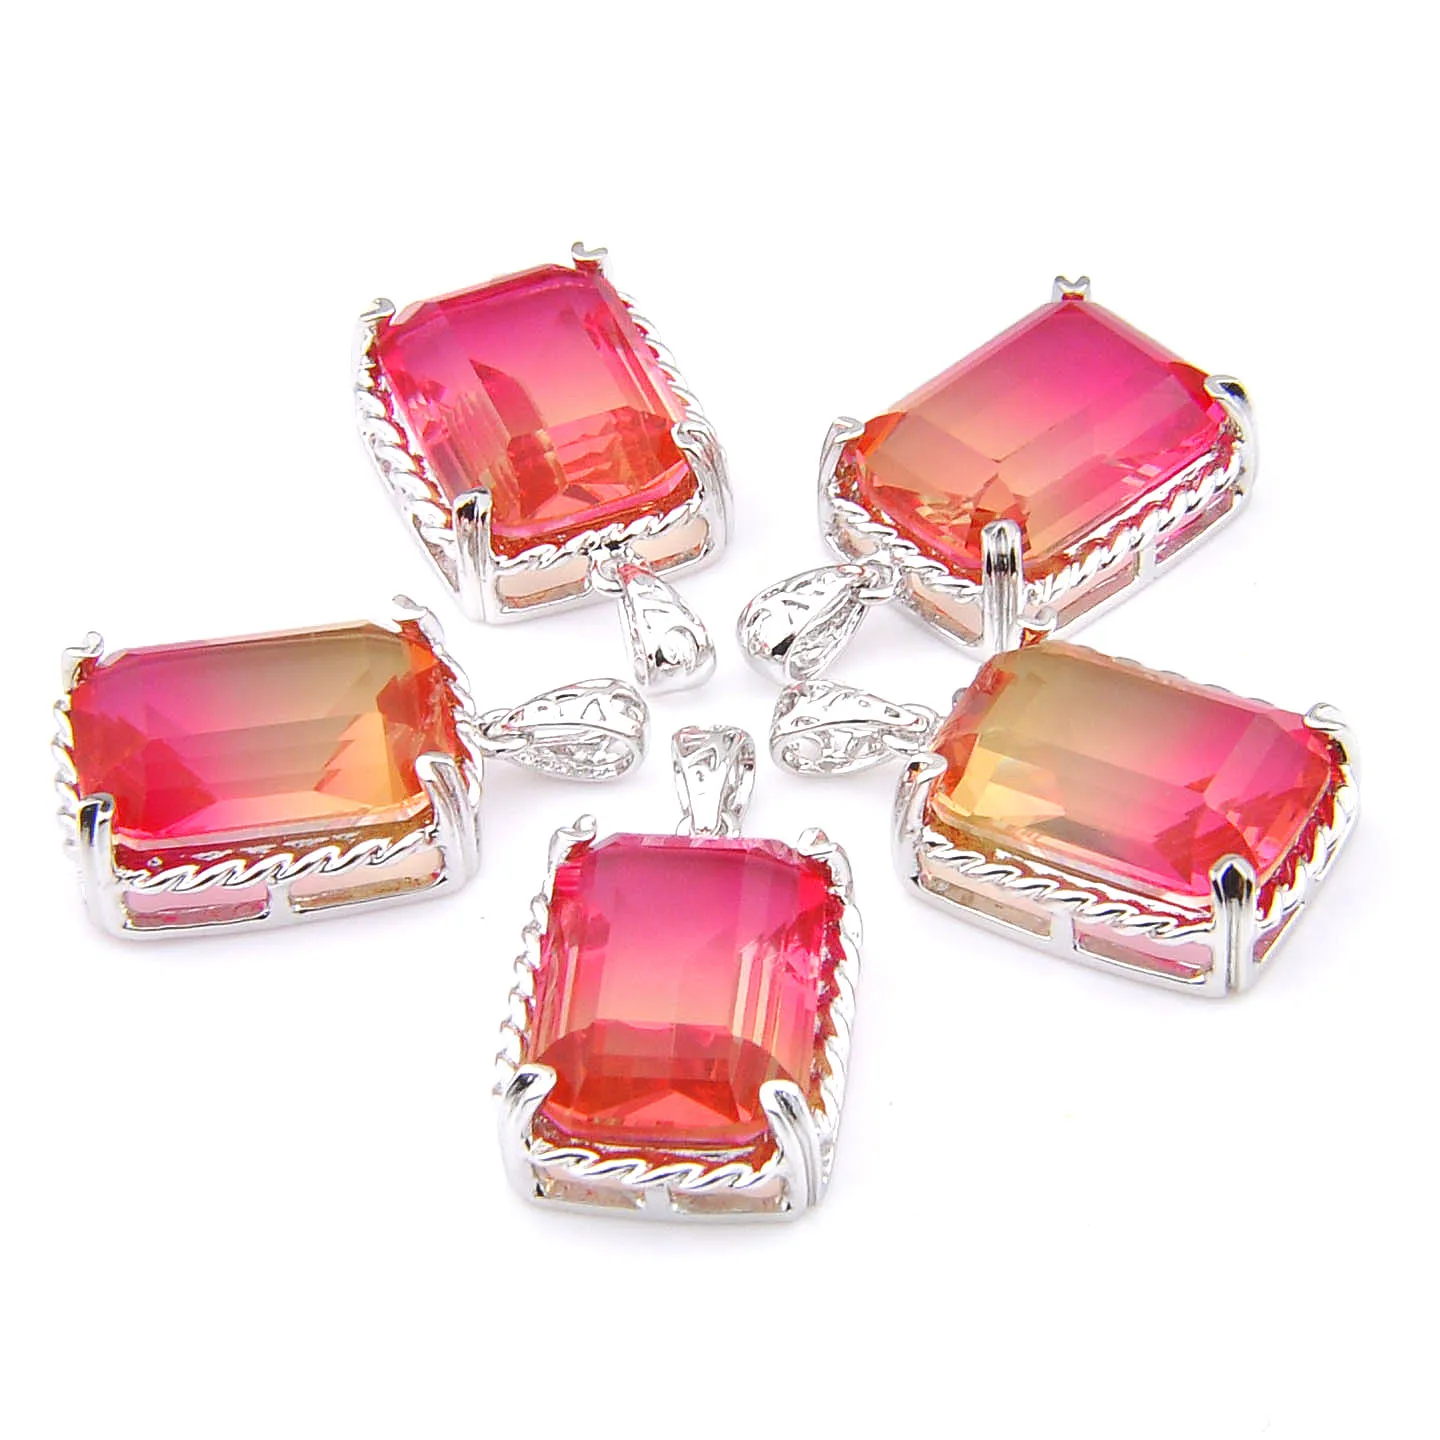 

MIX 5 PCS Xmas Gifts Big Offer Rectangle Yellow Rainbow Bi-Colored Tourmaline Necklaces Pendants for Holiday Party Gifts